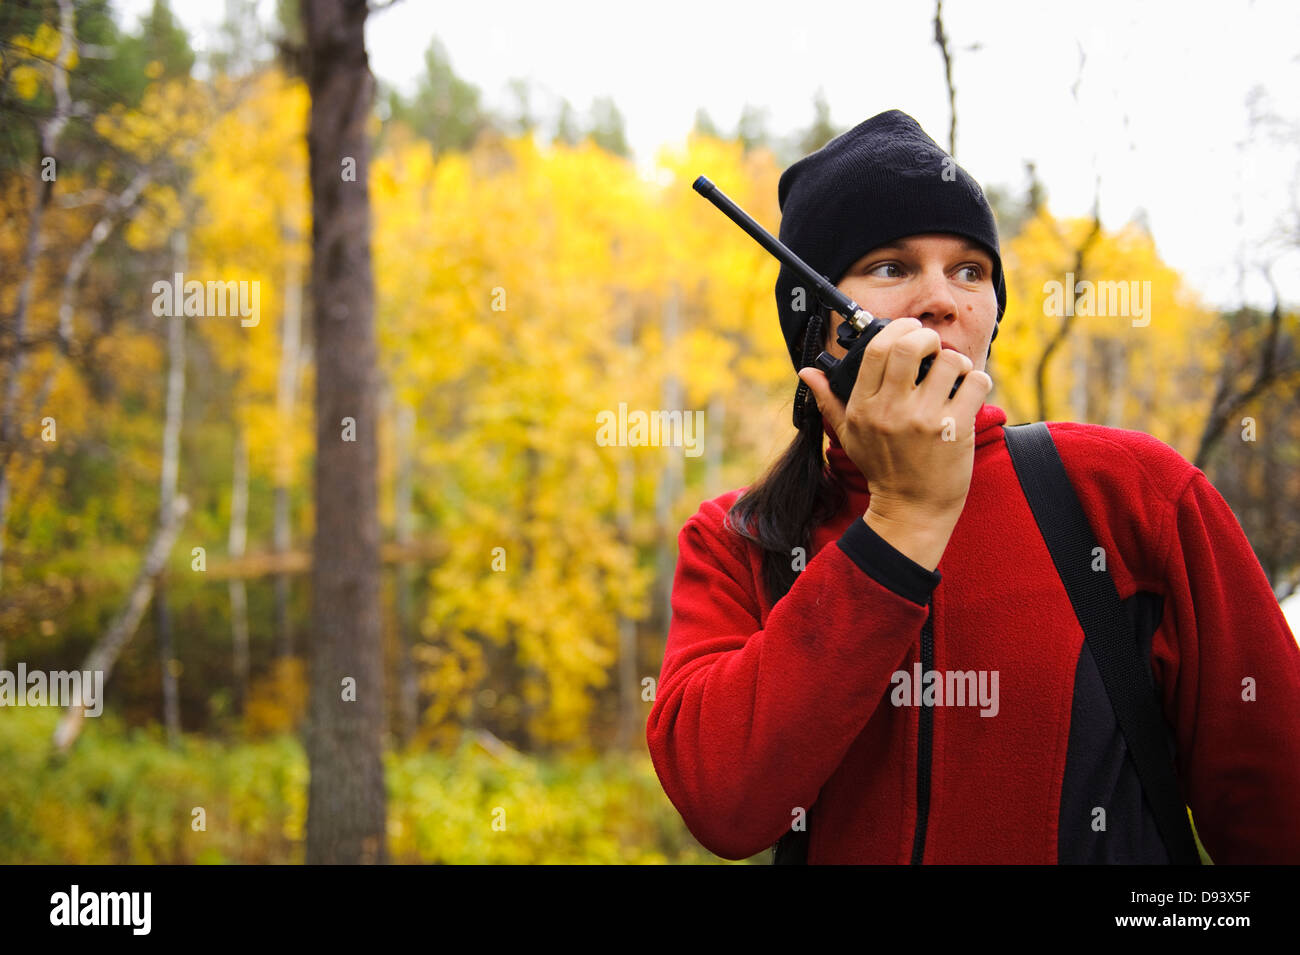 Woman using walkie talkie in forest Stock Photo - Alamy